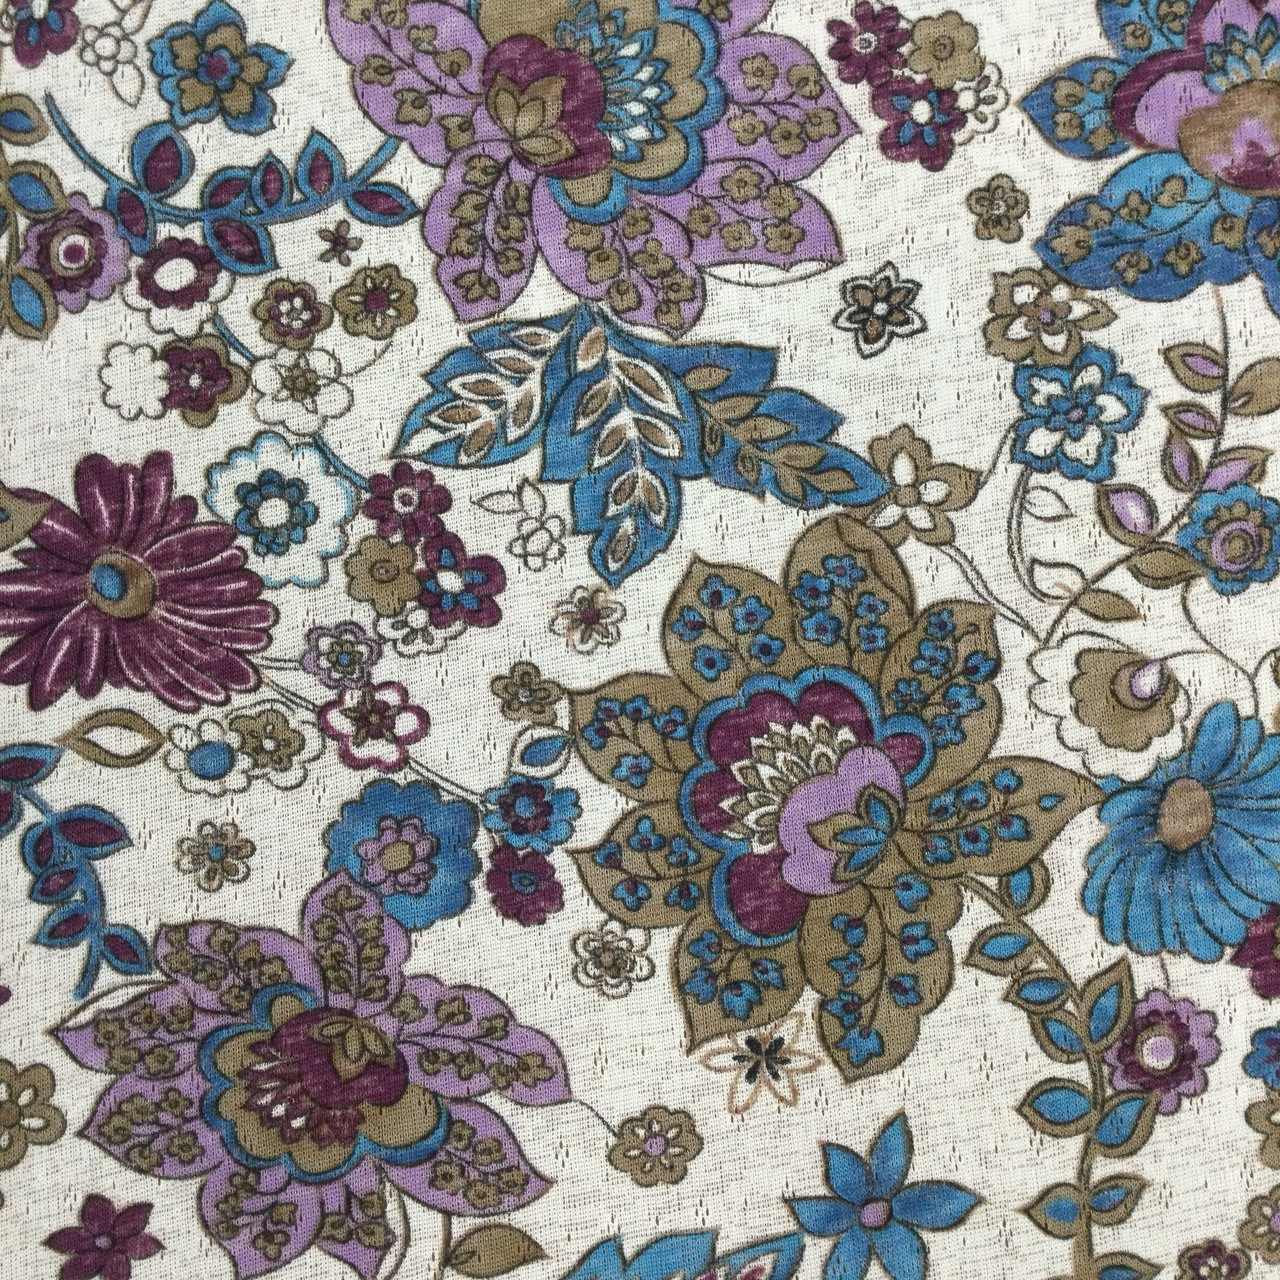 Lunarable Boho Fabric by The Yard, Floral Arrangement with Middle  Inspirations Mandala Flower, Stretch Knit Fabric for Clothing Sewing and  Arts